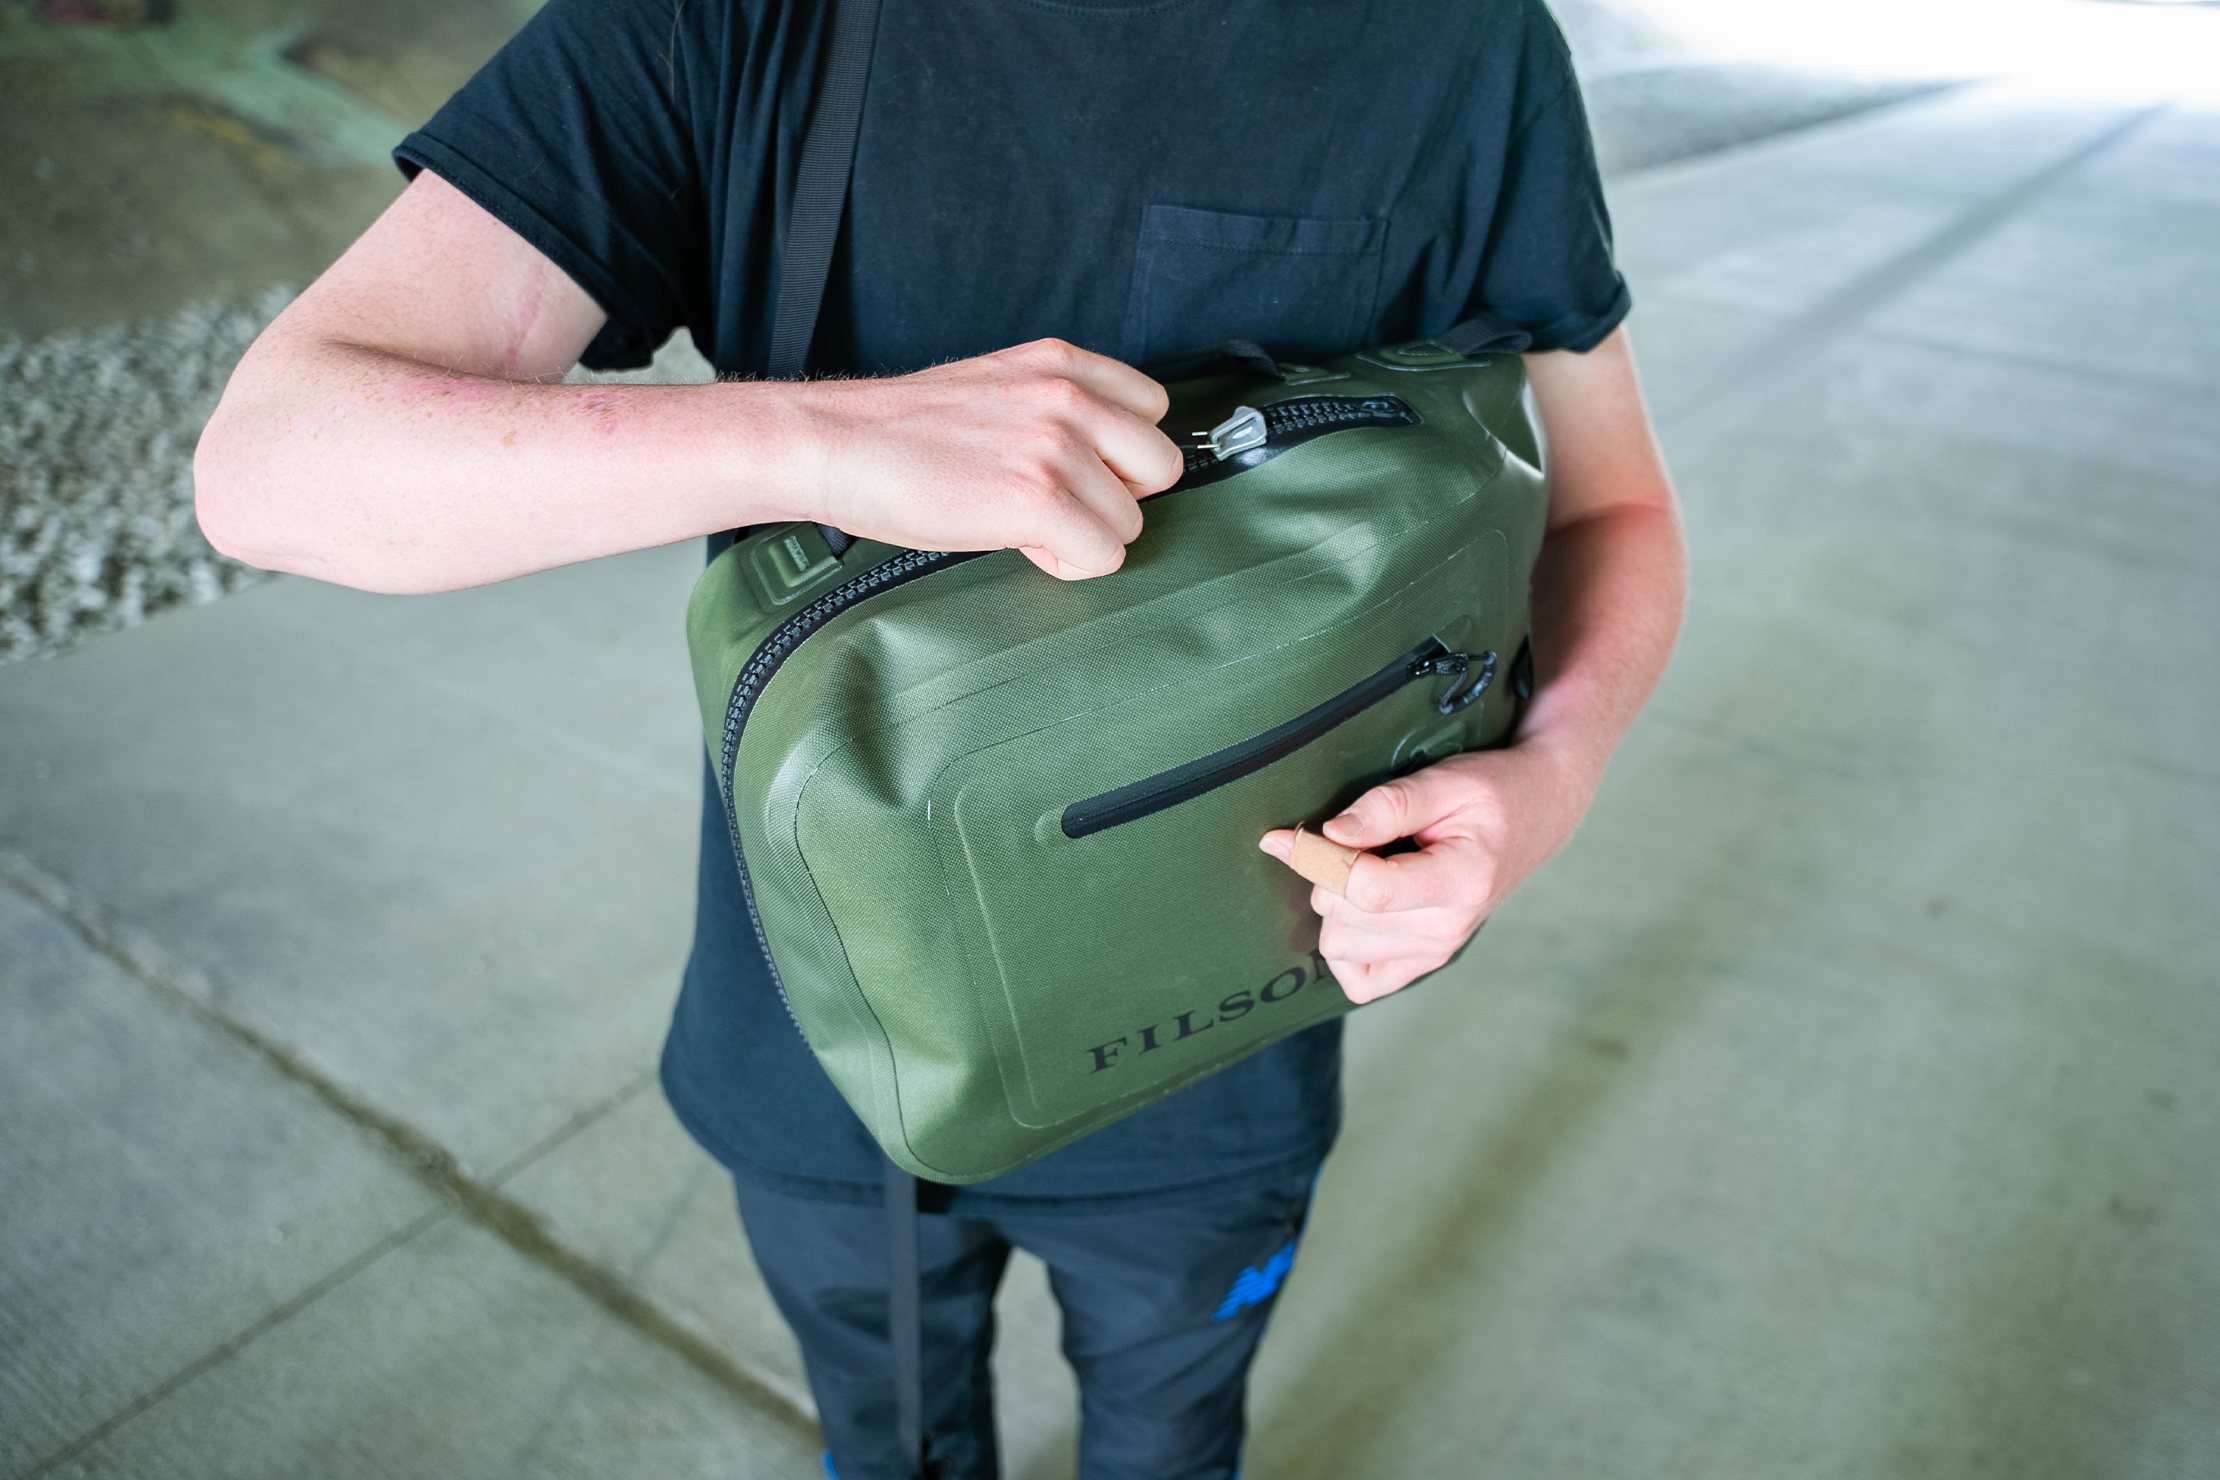 Filson Dry Sling Pack In Use 1